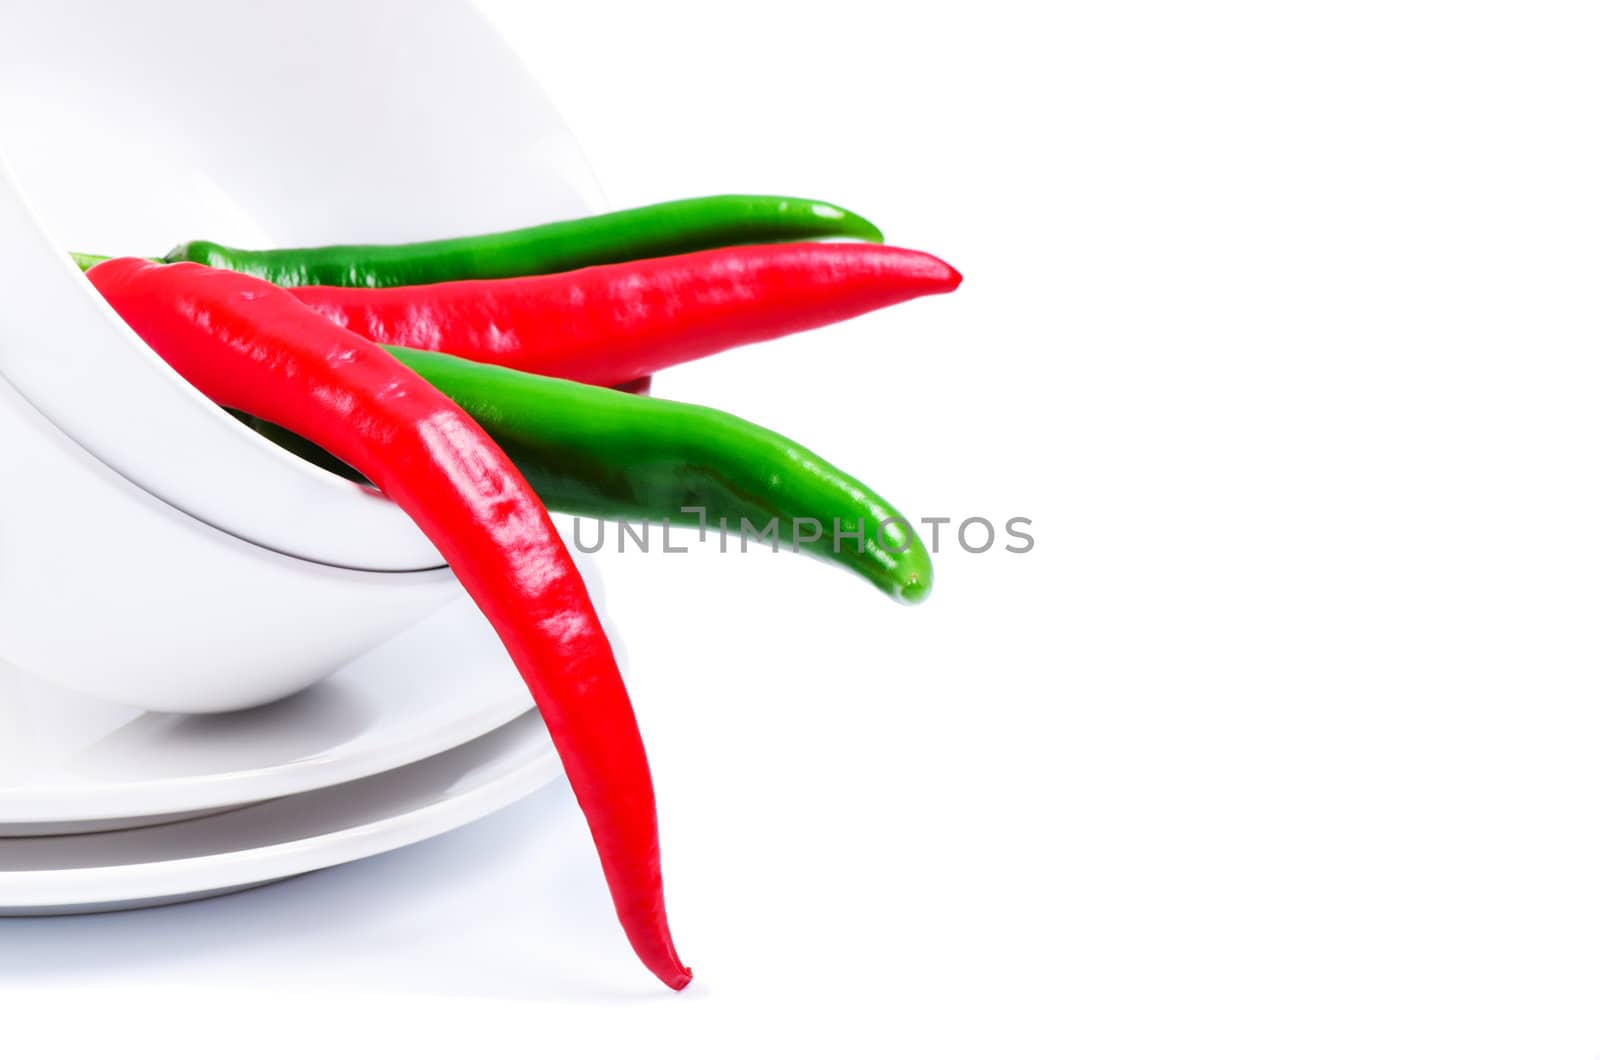 Chili peppers in bowl  by Nanisimova